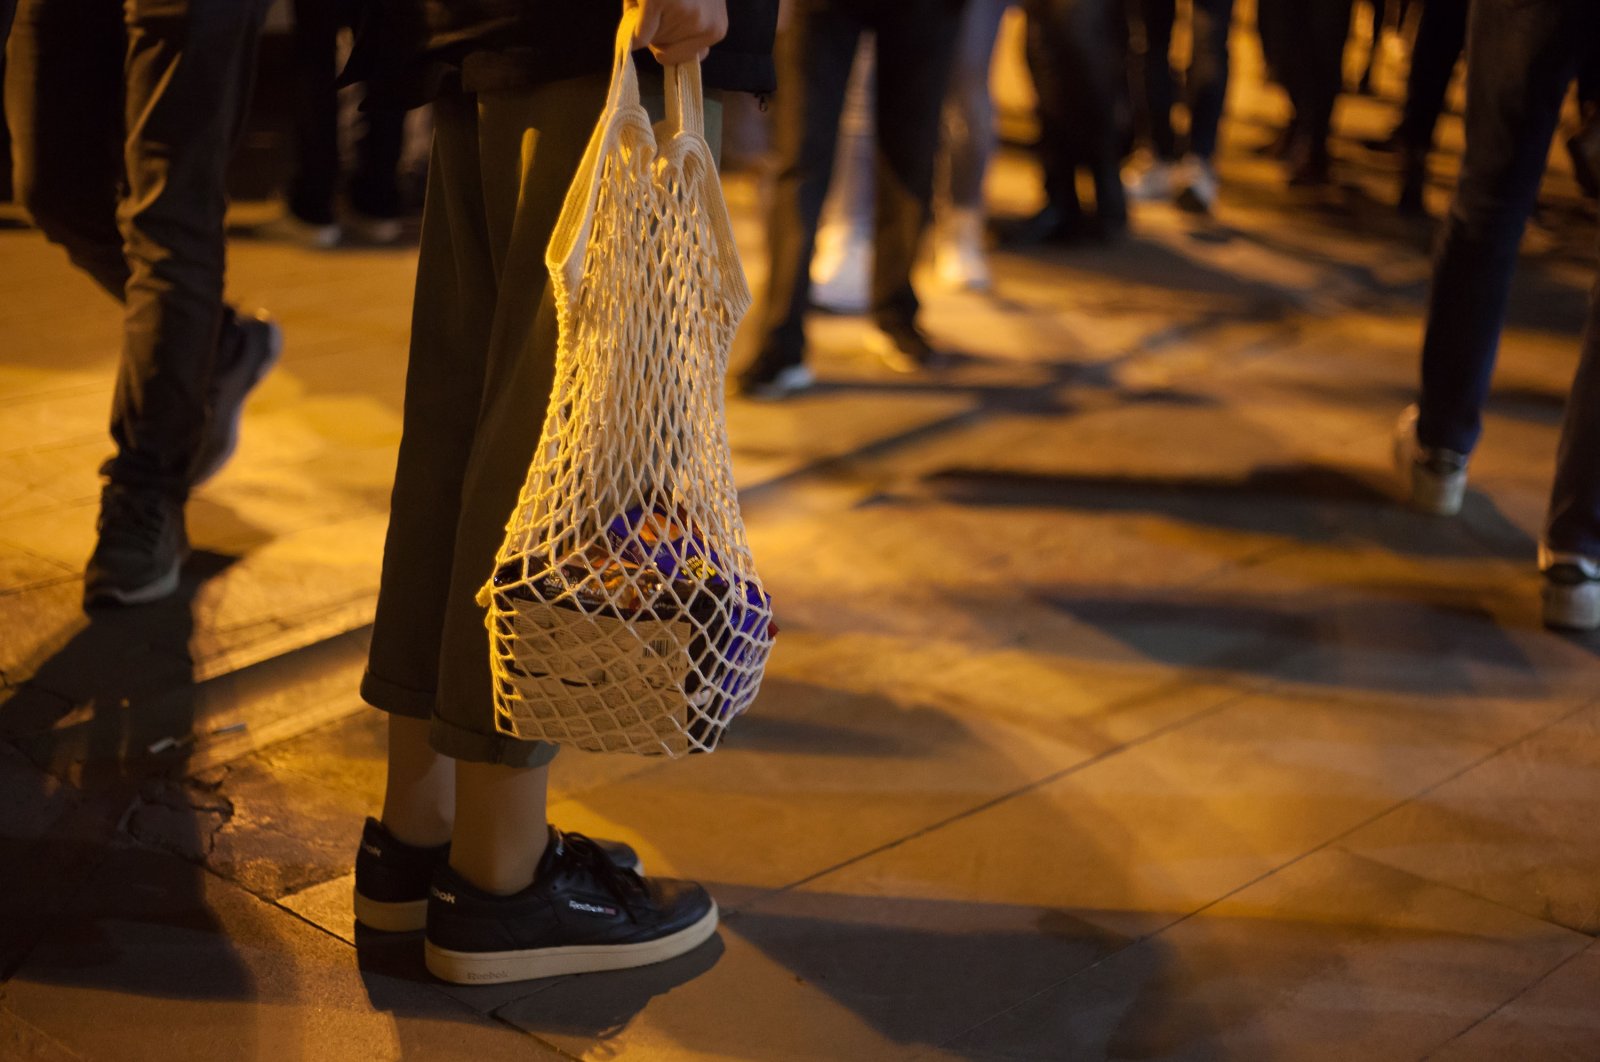 A person holds a net bag, in Istanbul, Turkey, Feb. 11, 2019. (Shutterstock Photo)